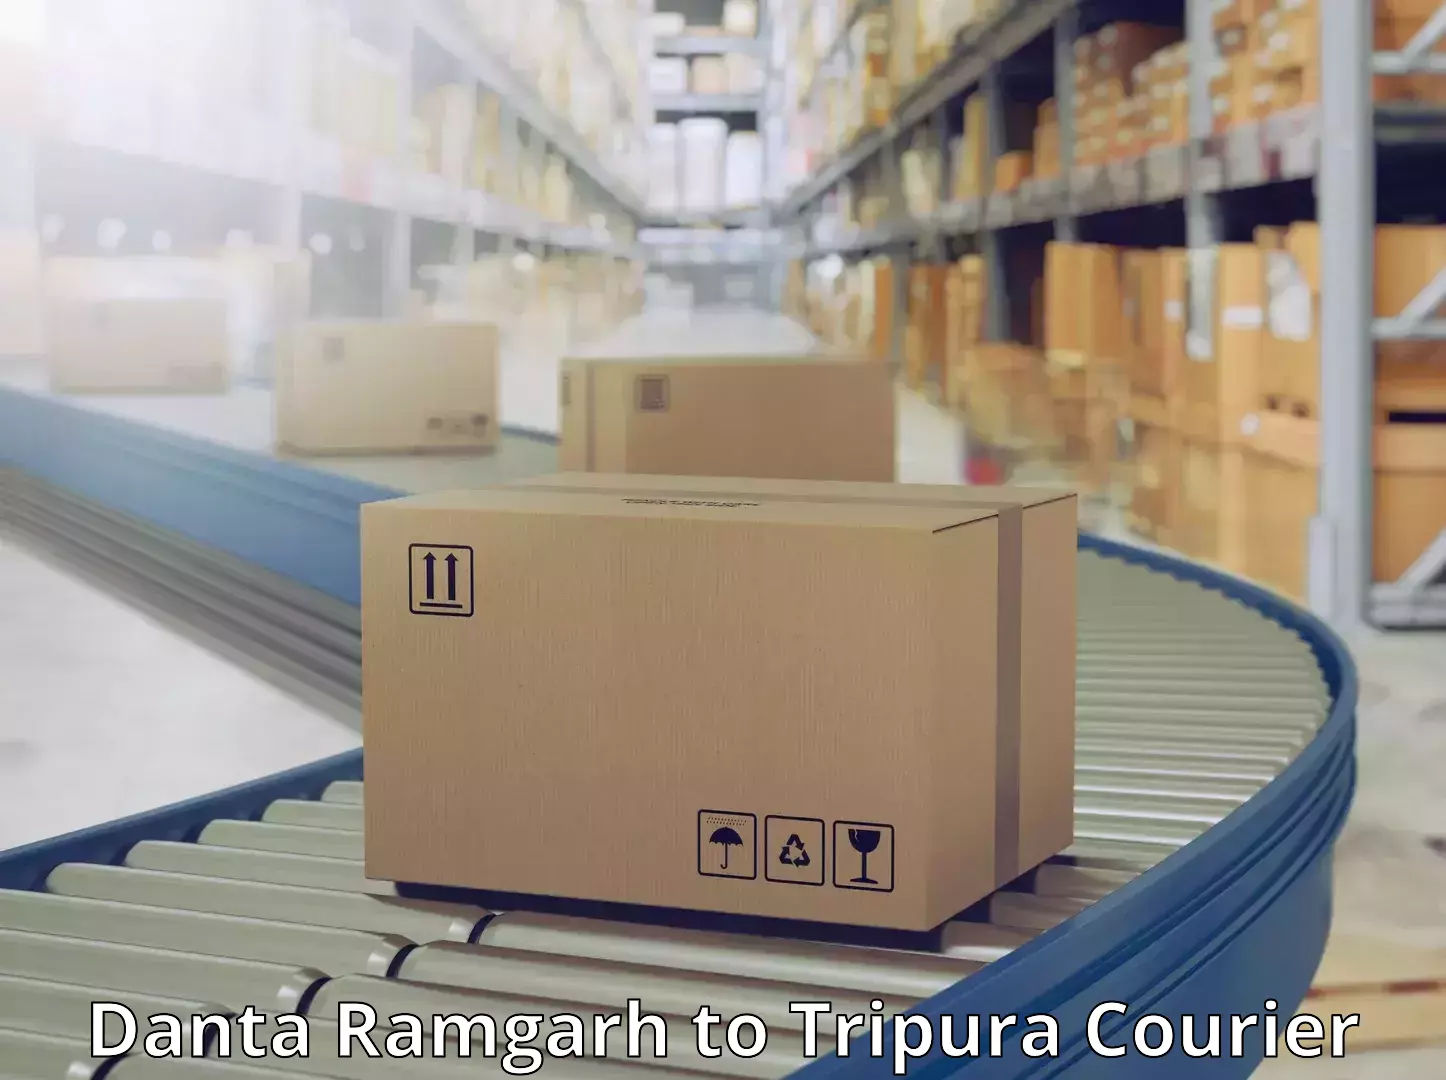 Nationwide parcel services Danta Ramgarh to Tripura